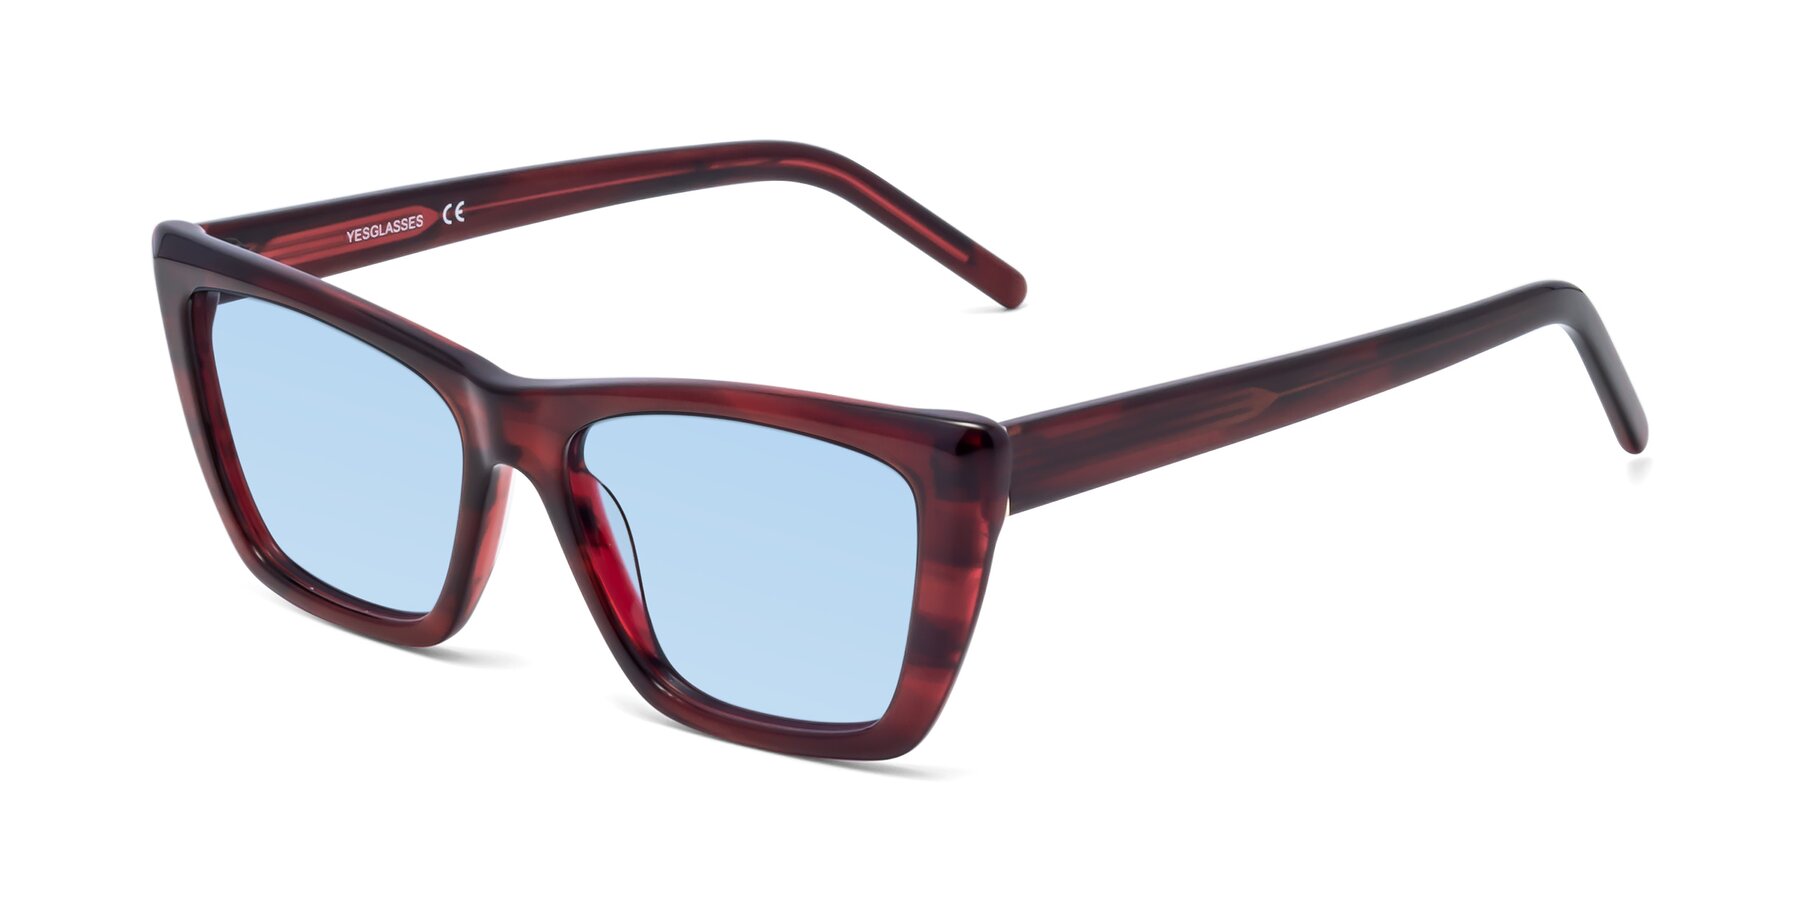 Angle of 1494 in Stripe Wine with Light Blue Tinted Lenses